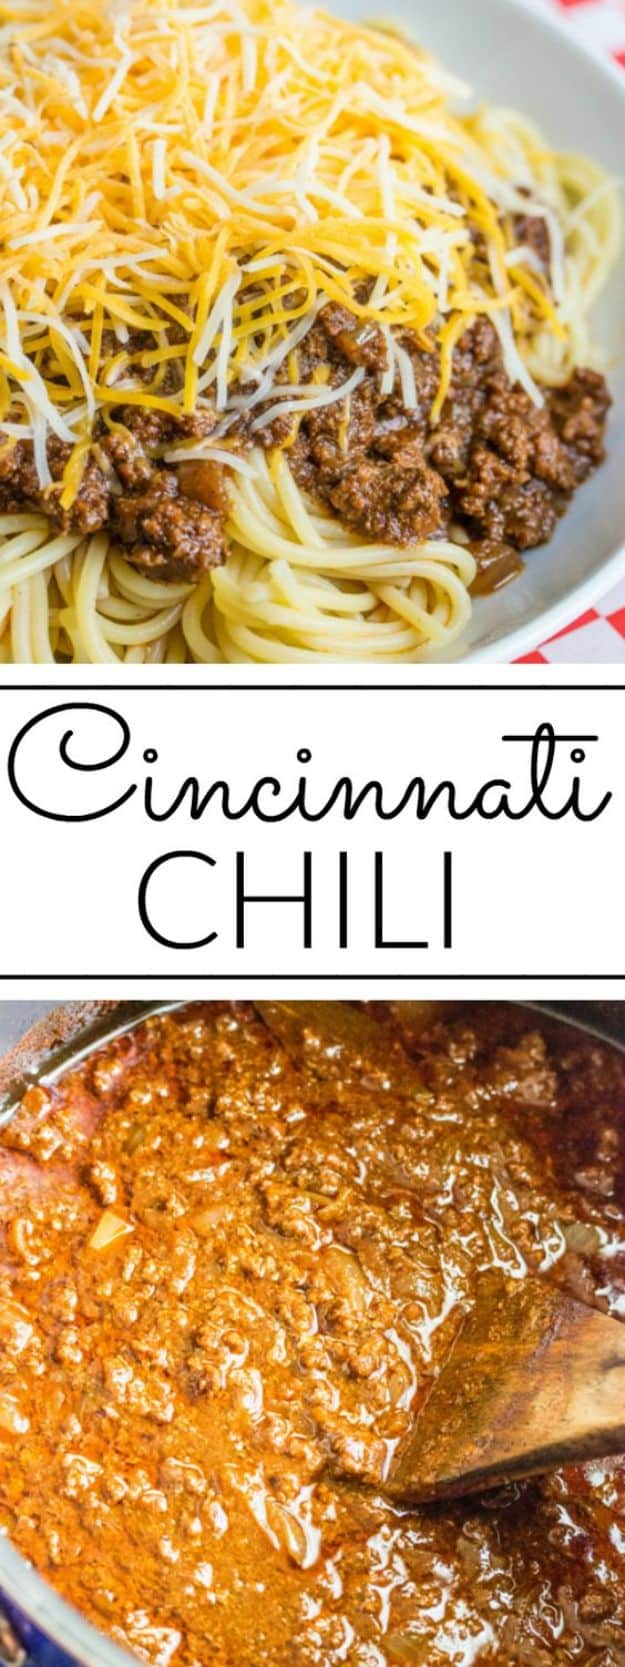 Best Recipes With Ground Beef - Cincinnati Chili - Easy Dinners and Ground Beef Recipe Ideas - Quick Lunch Salads, Casseroles, Tacos, One Skillet Meals - Healthy Crockpot Foods With Hamburger Meat - Mexican Casserole, Instant Pot Carne Molida, Low Carb and Keto Diet - Rice, Pasta, Potatoes and Crescent Rolls 